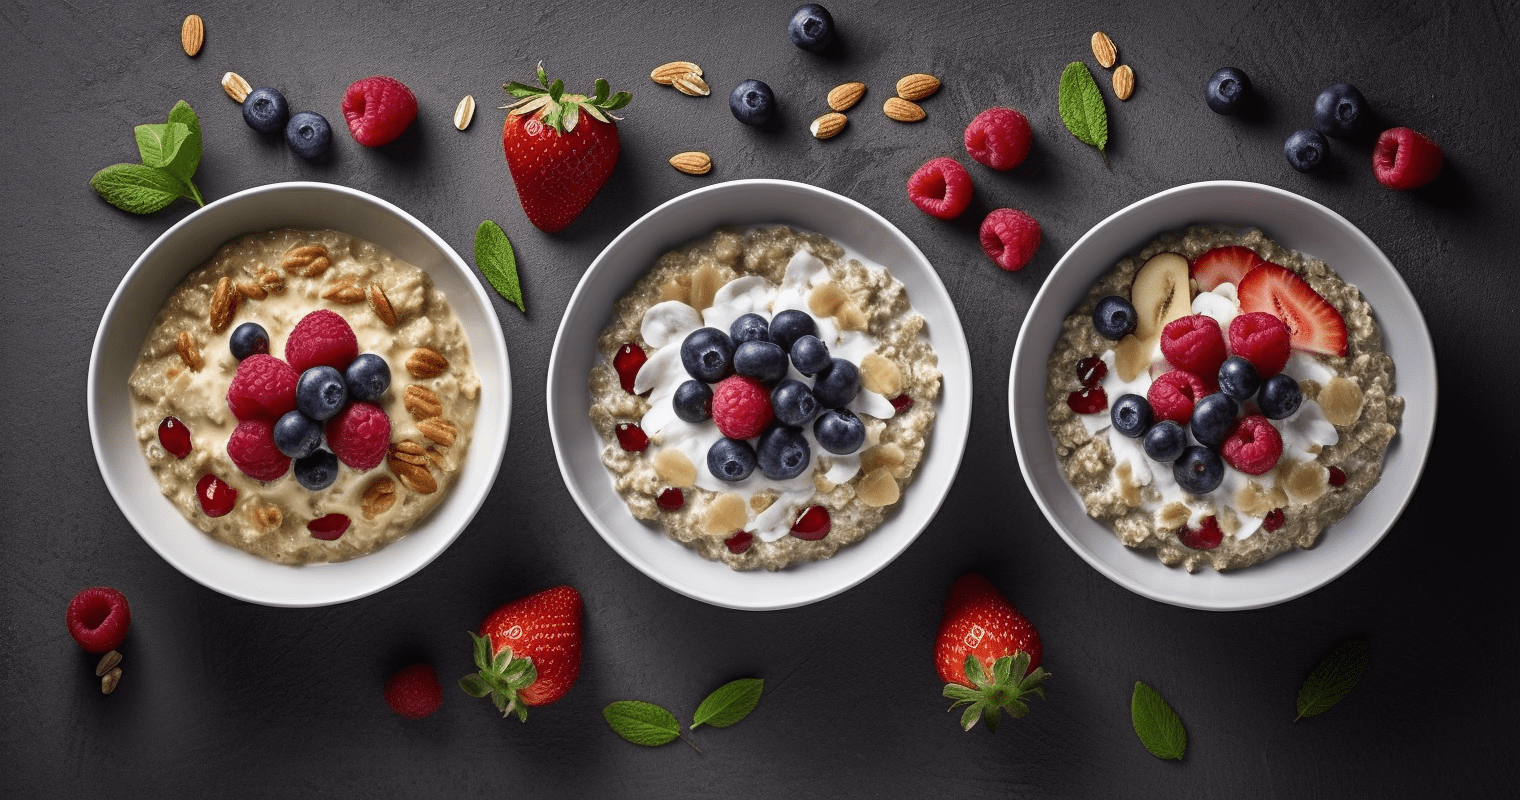 Image of Oatmeal with Berries and Nuts